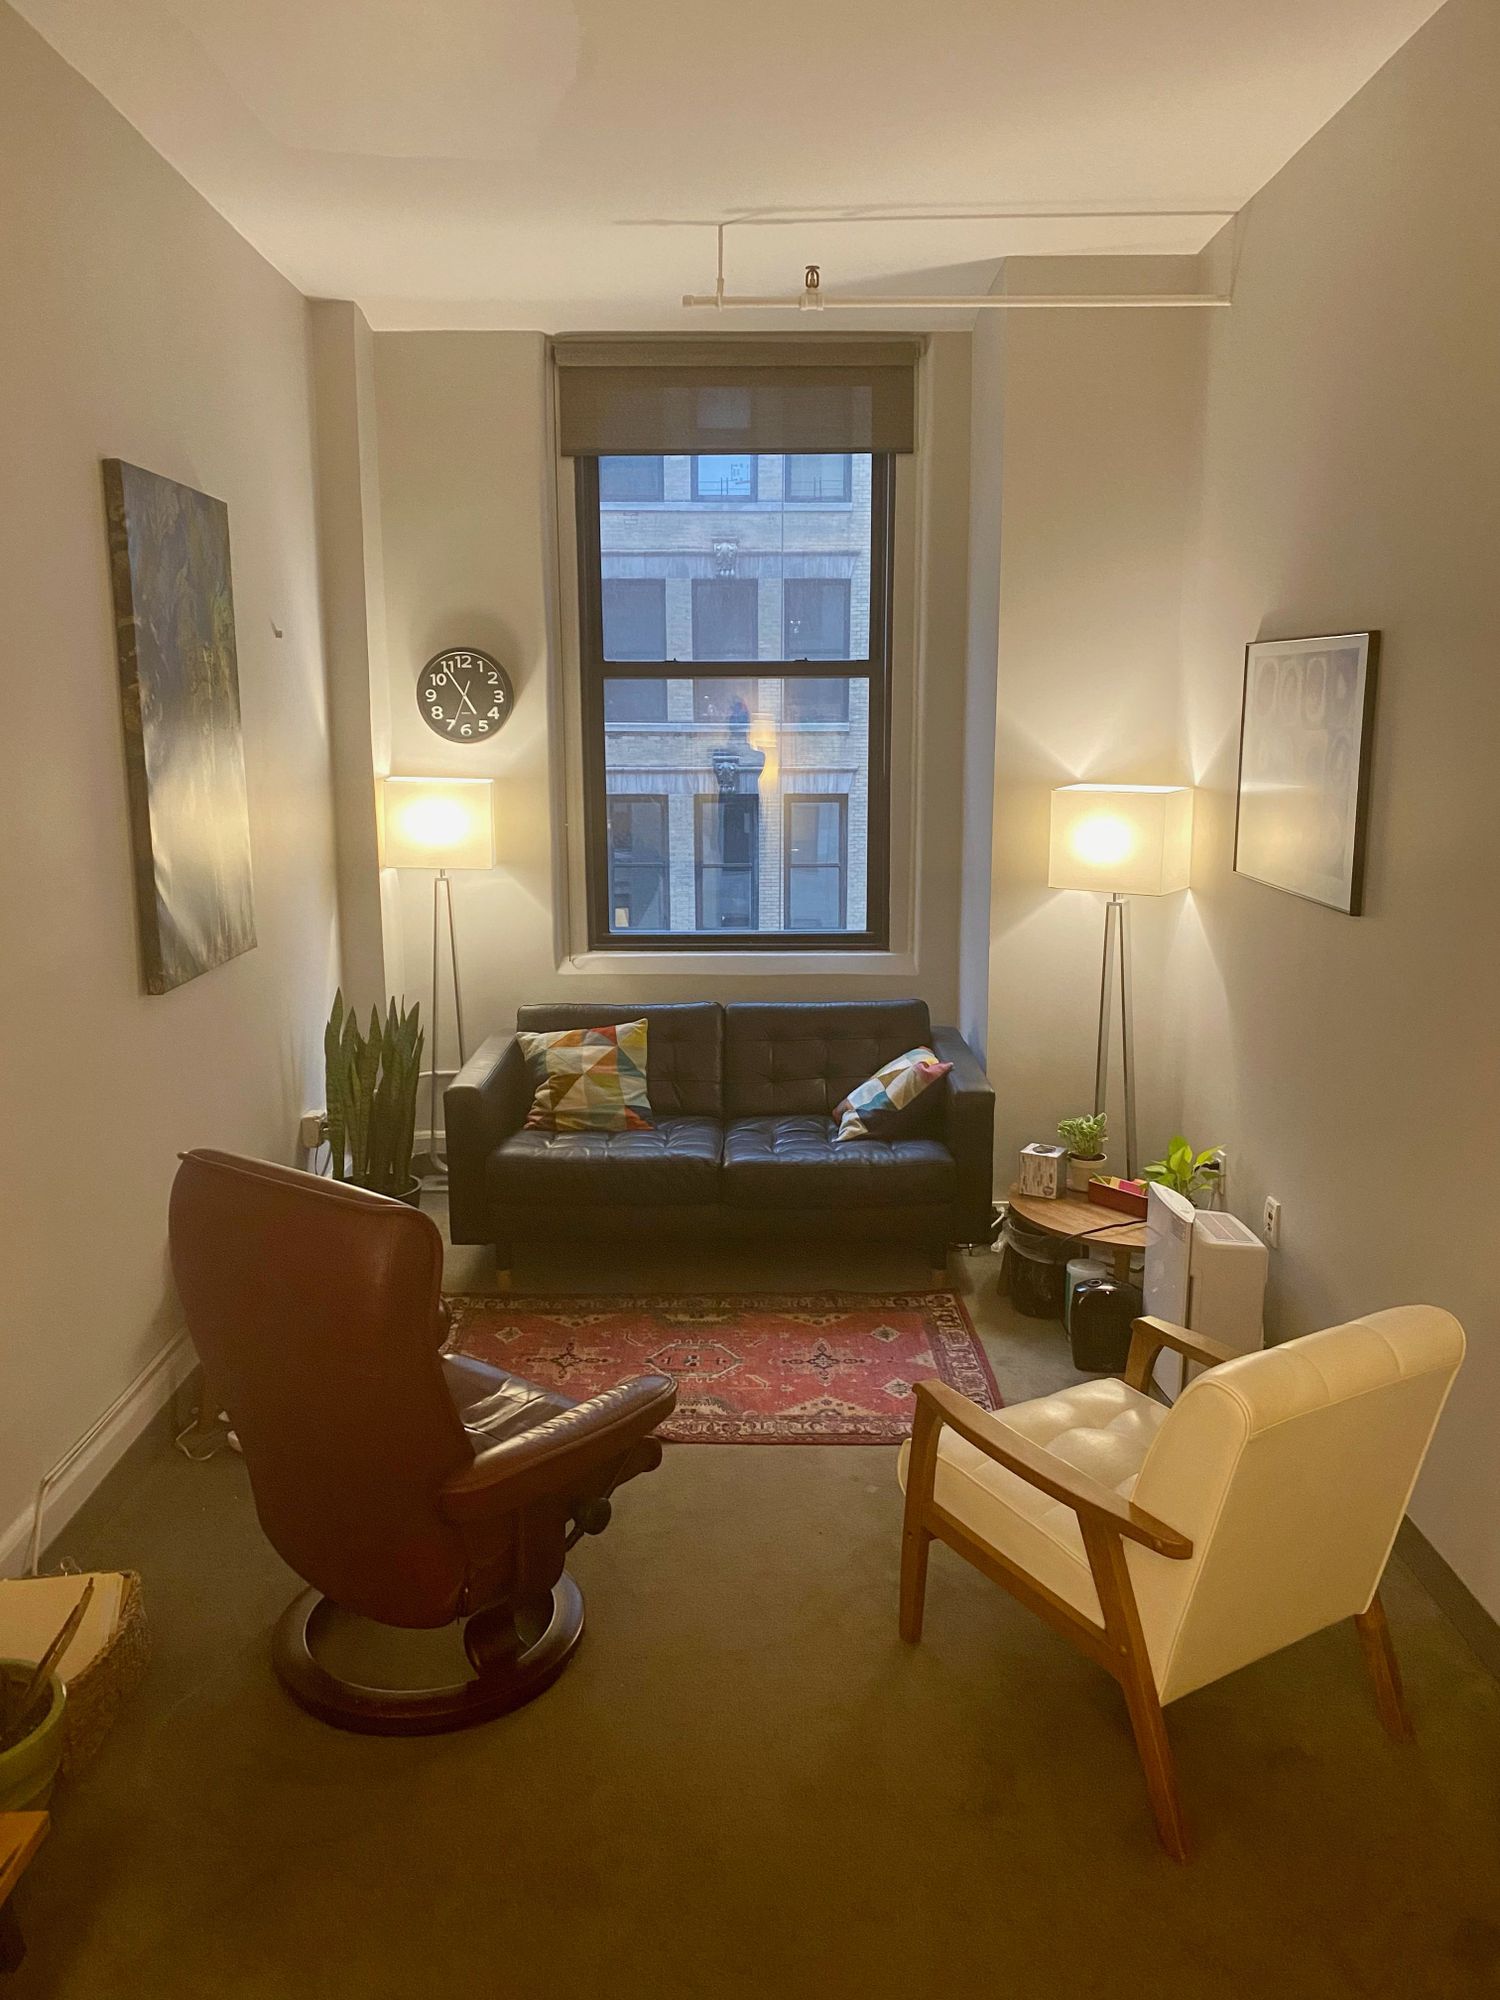 Gallery Photo of Our Flatiron office space